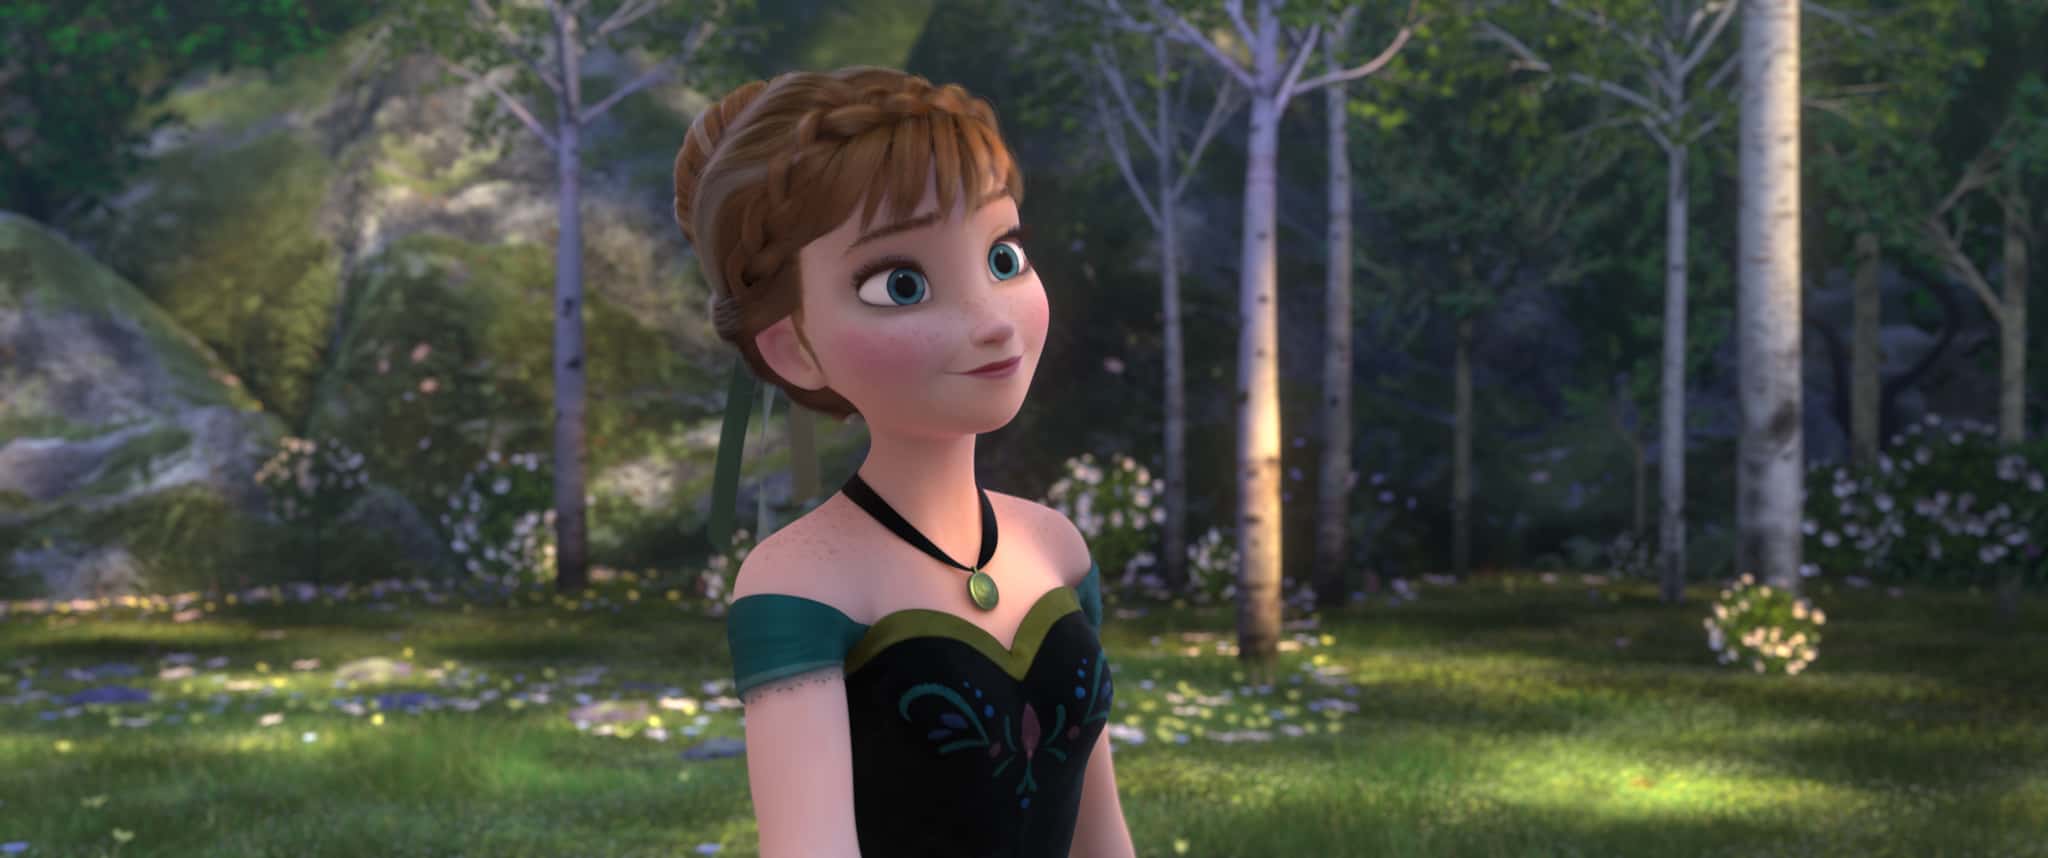 Anna outside in the forest in Disney's Frozen